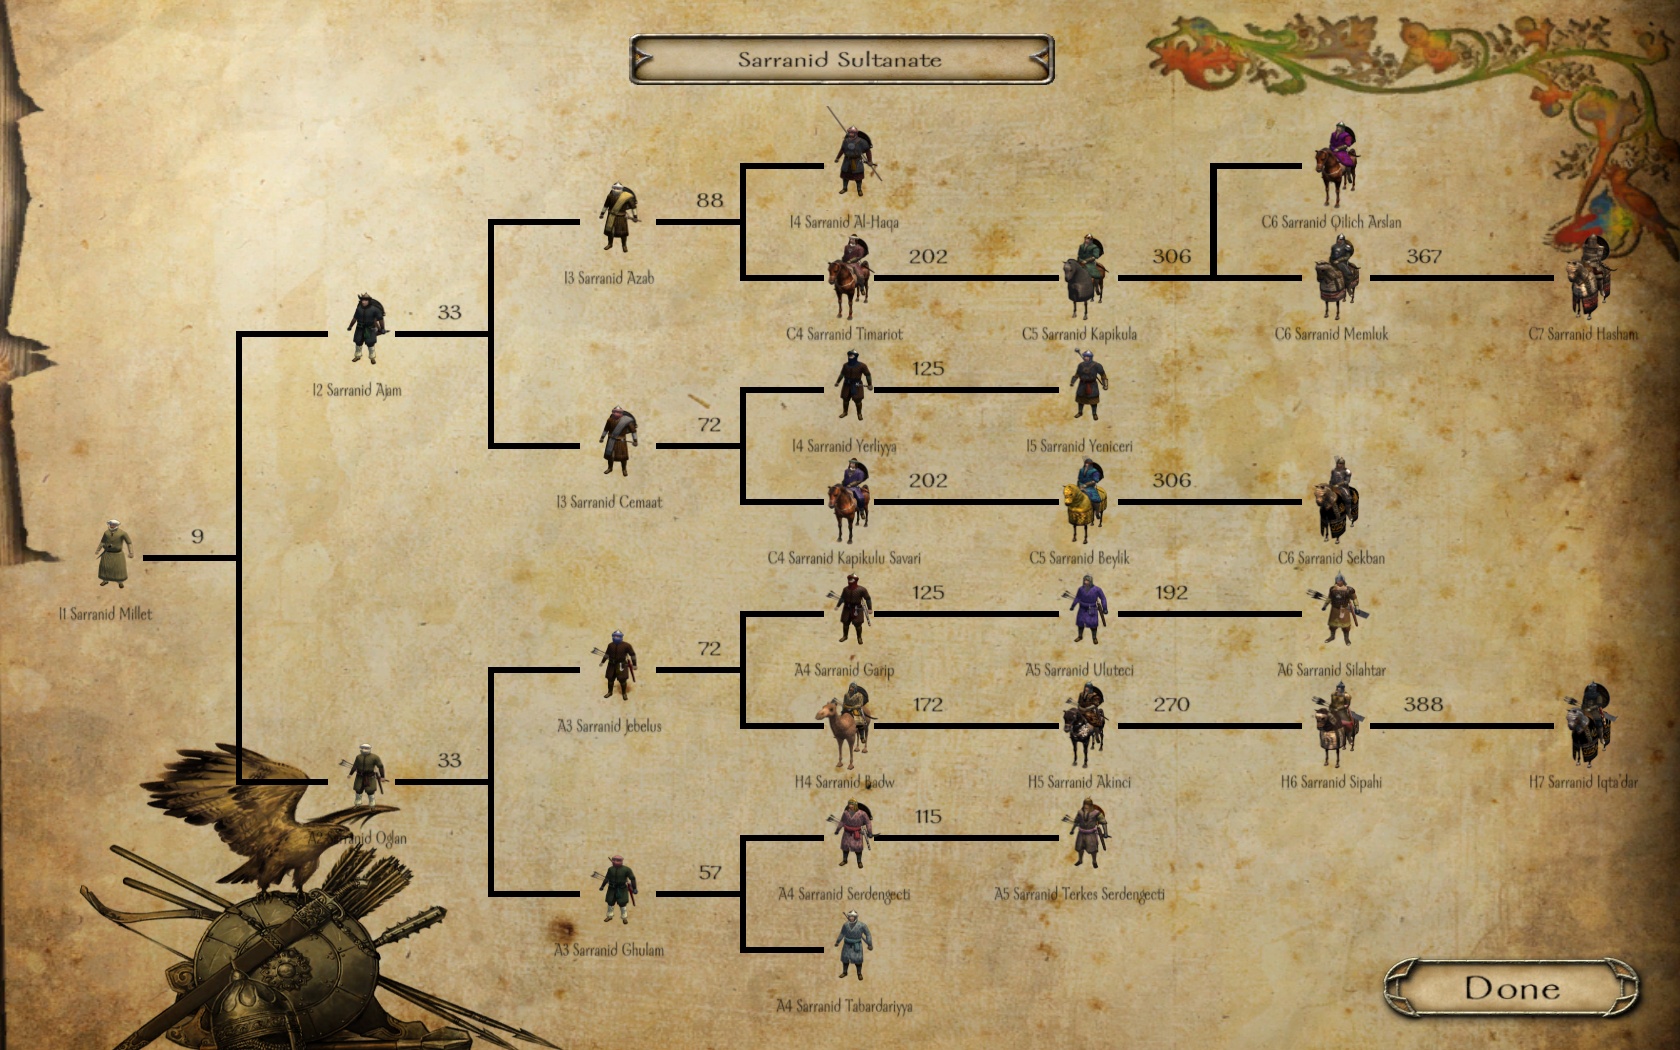 a world of ice and fire troop tree